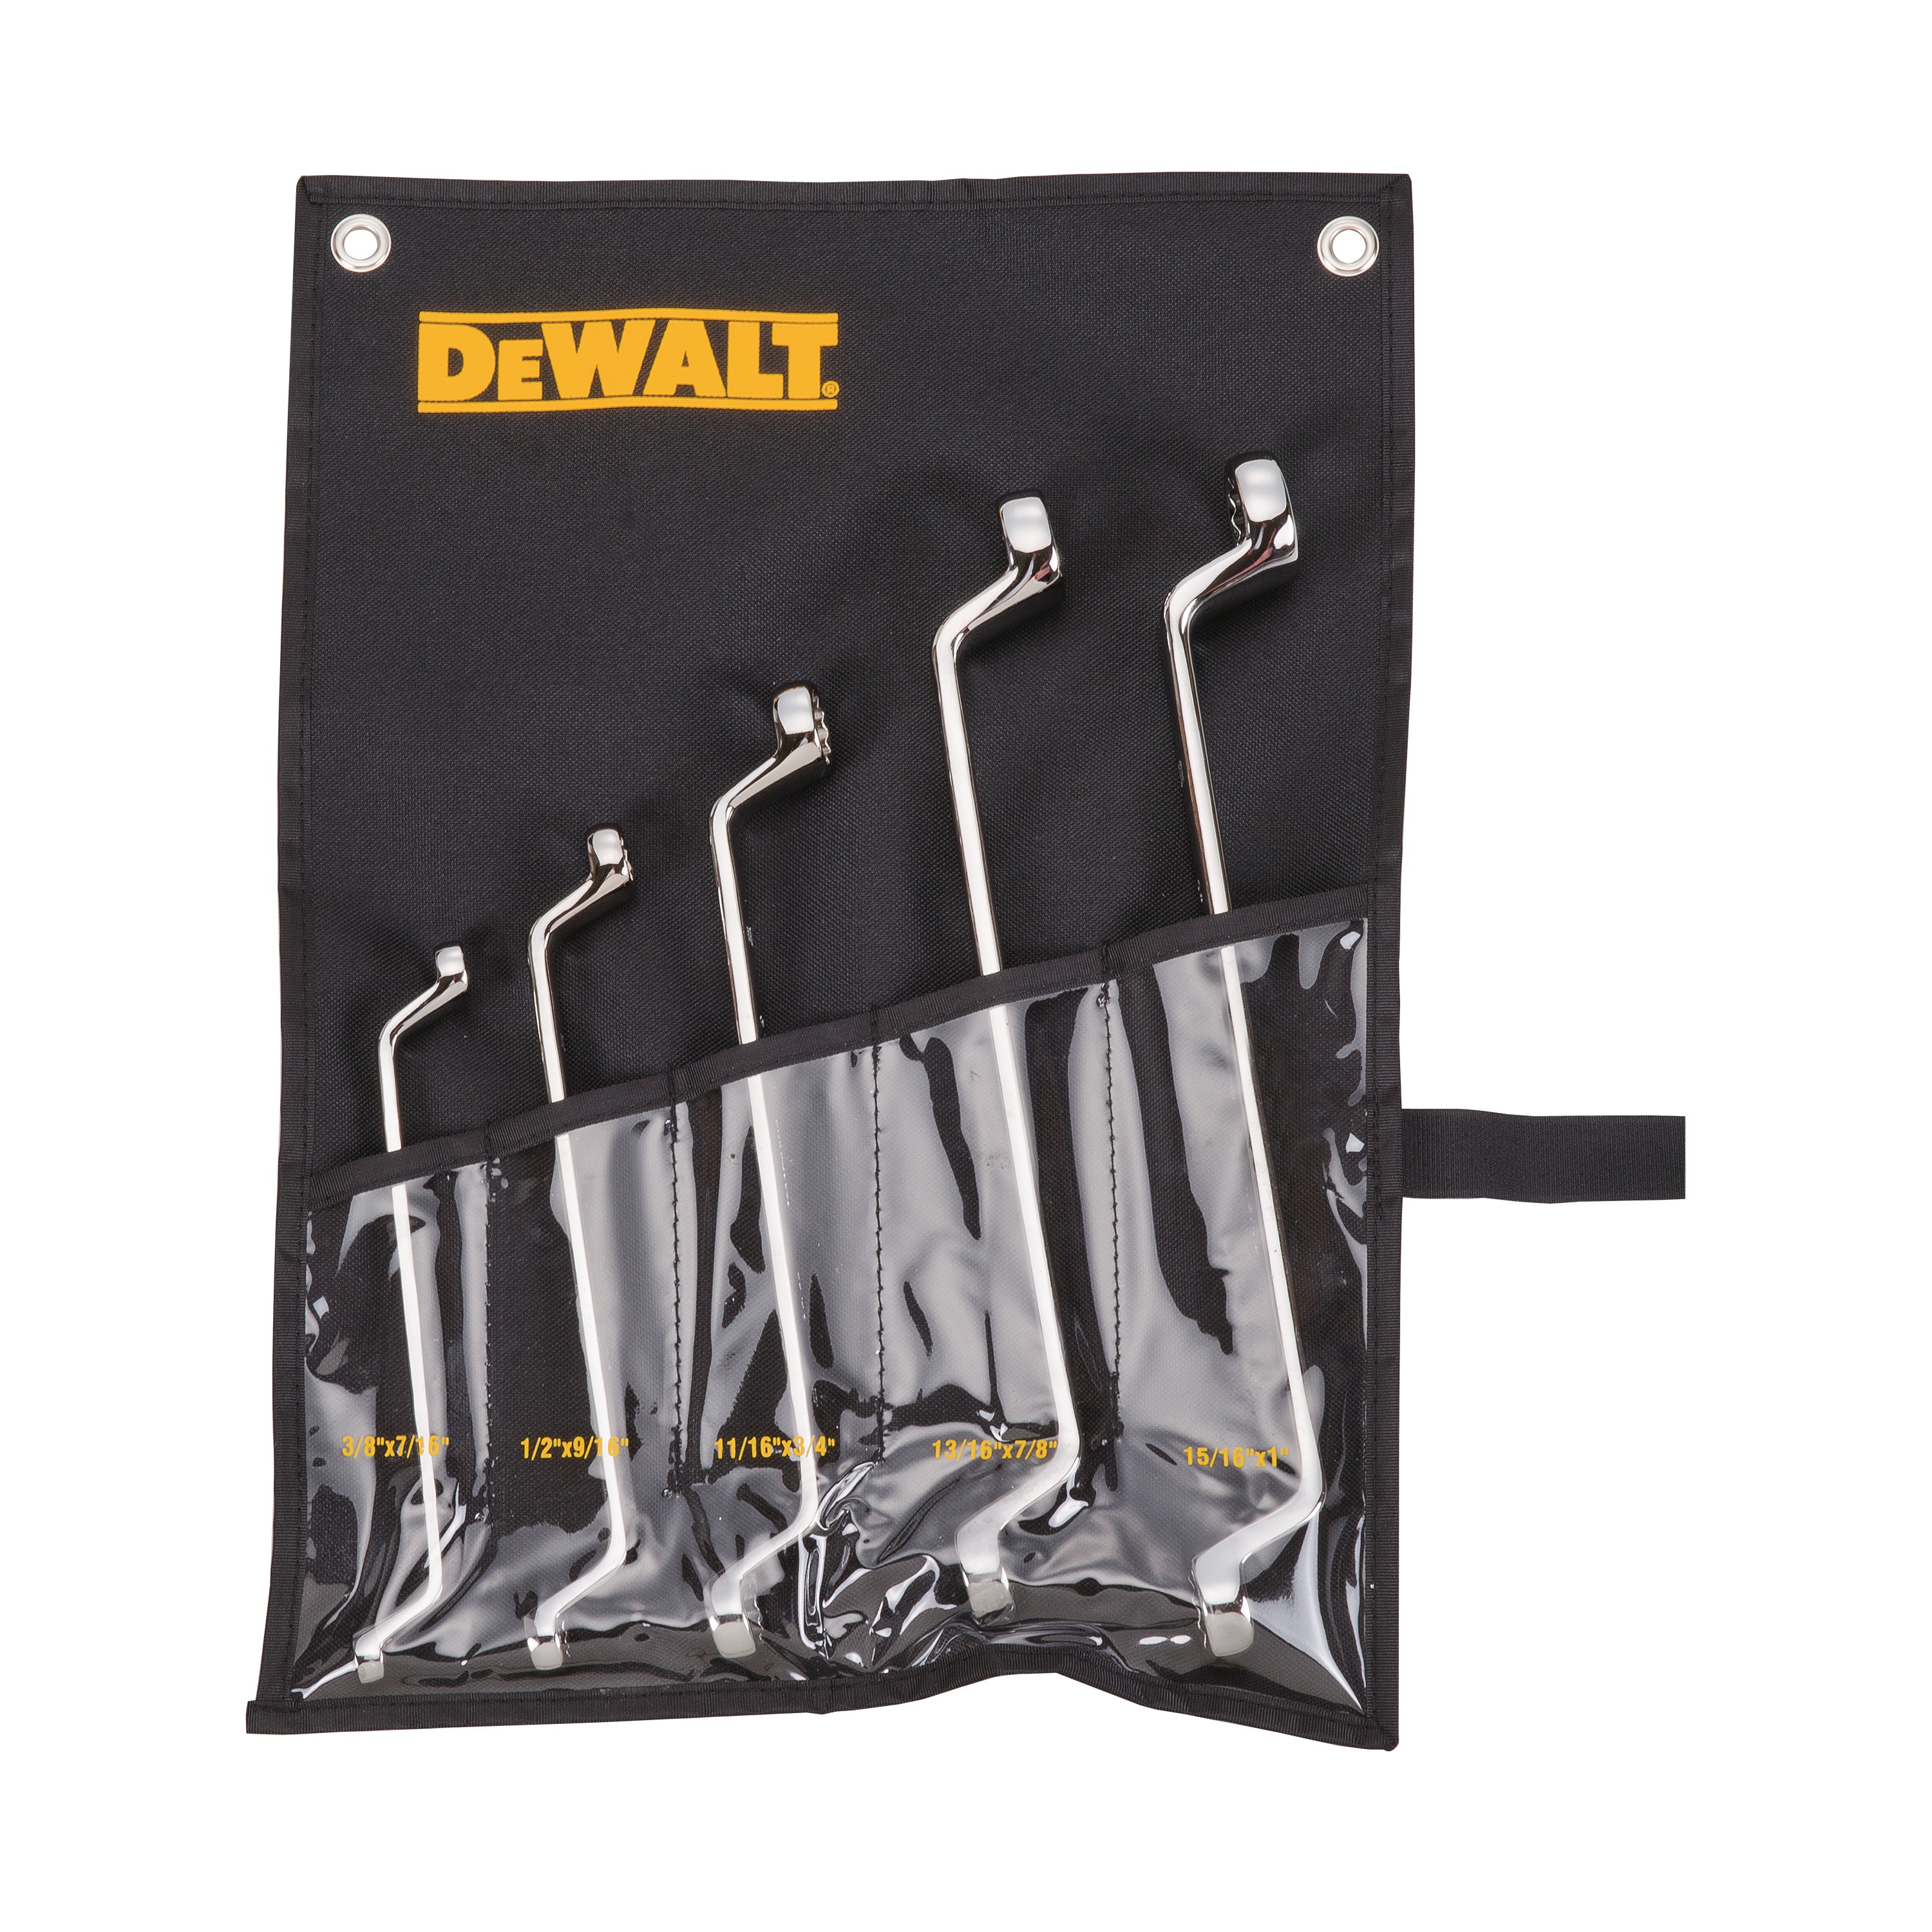 DEWALT 5 piece full polish offset double box wrench set assembled in its kit.